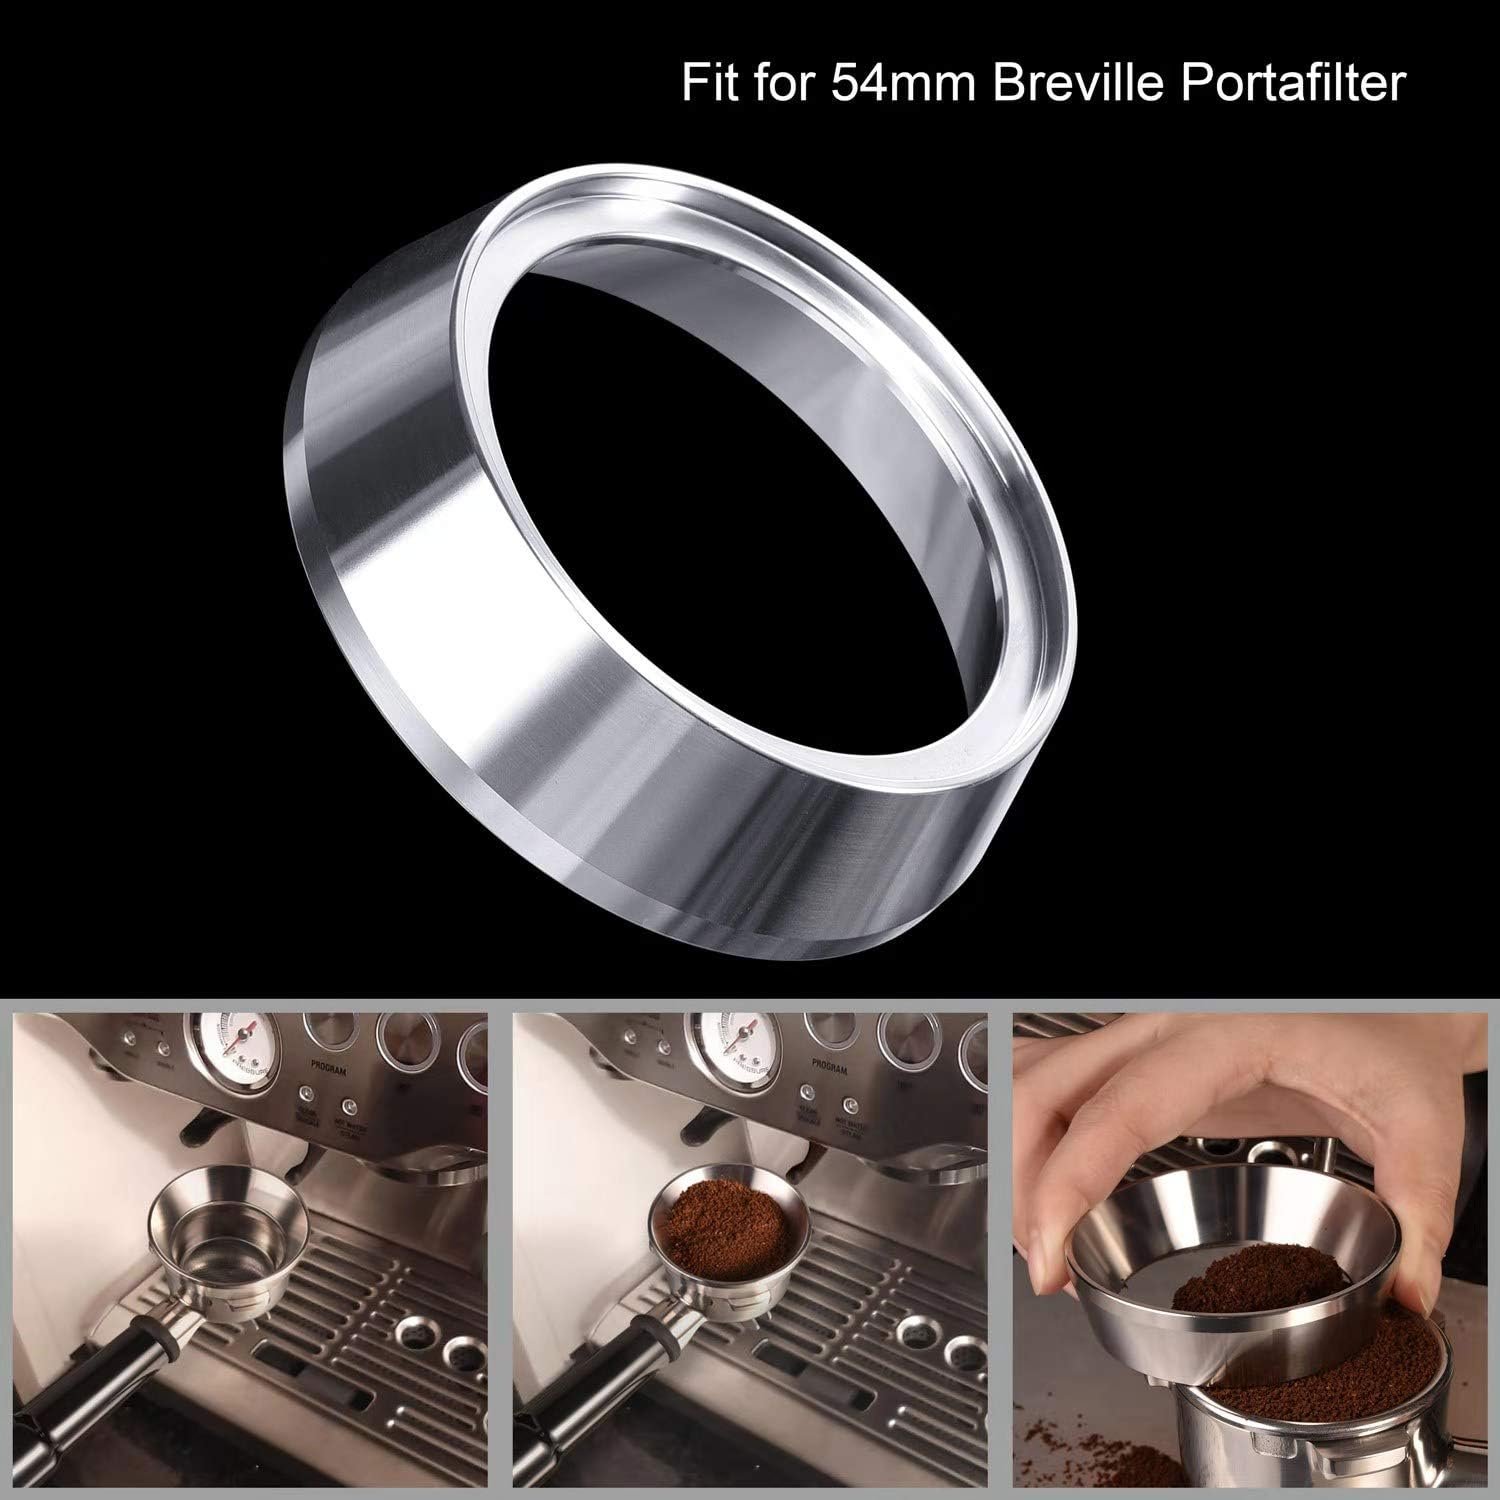 54mm espresso dosing funnel matow stainless steel coffee dosing ring compatible with 54mm breville portafilter 3